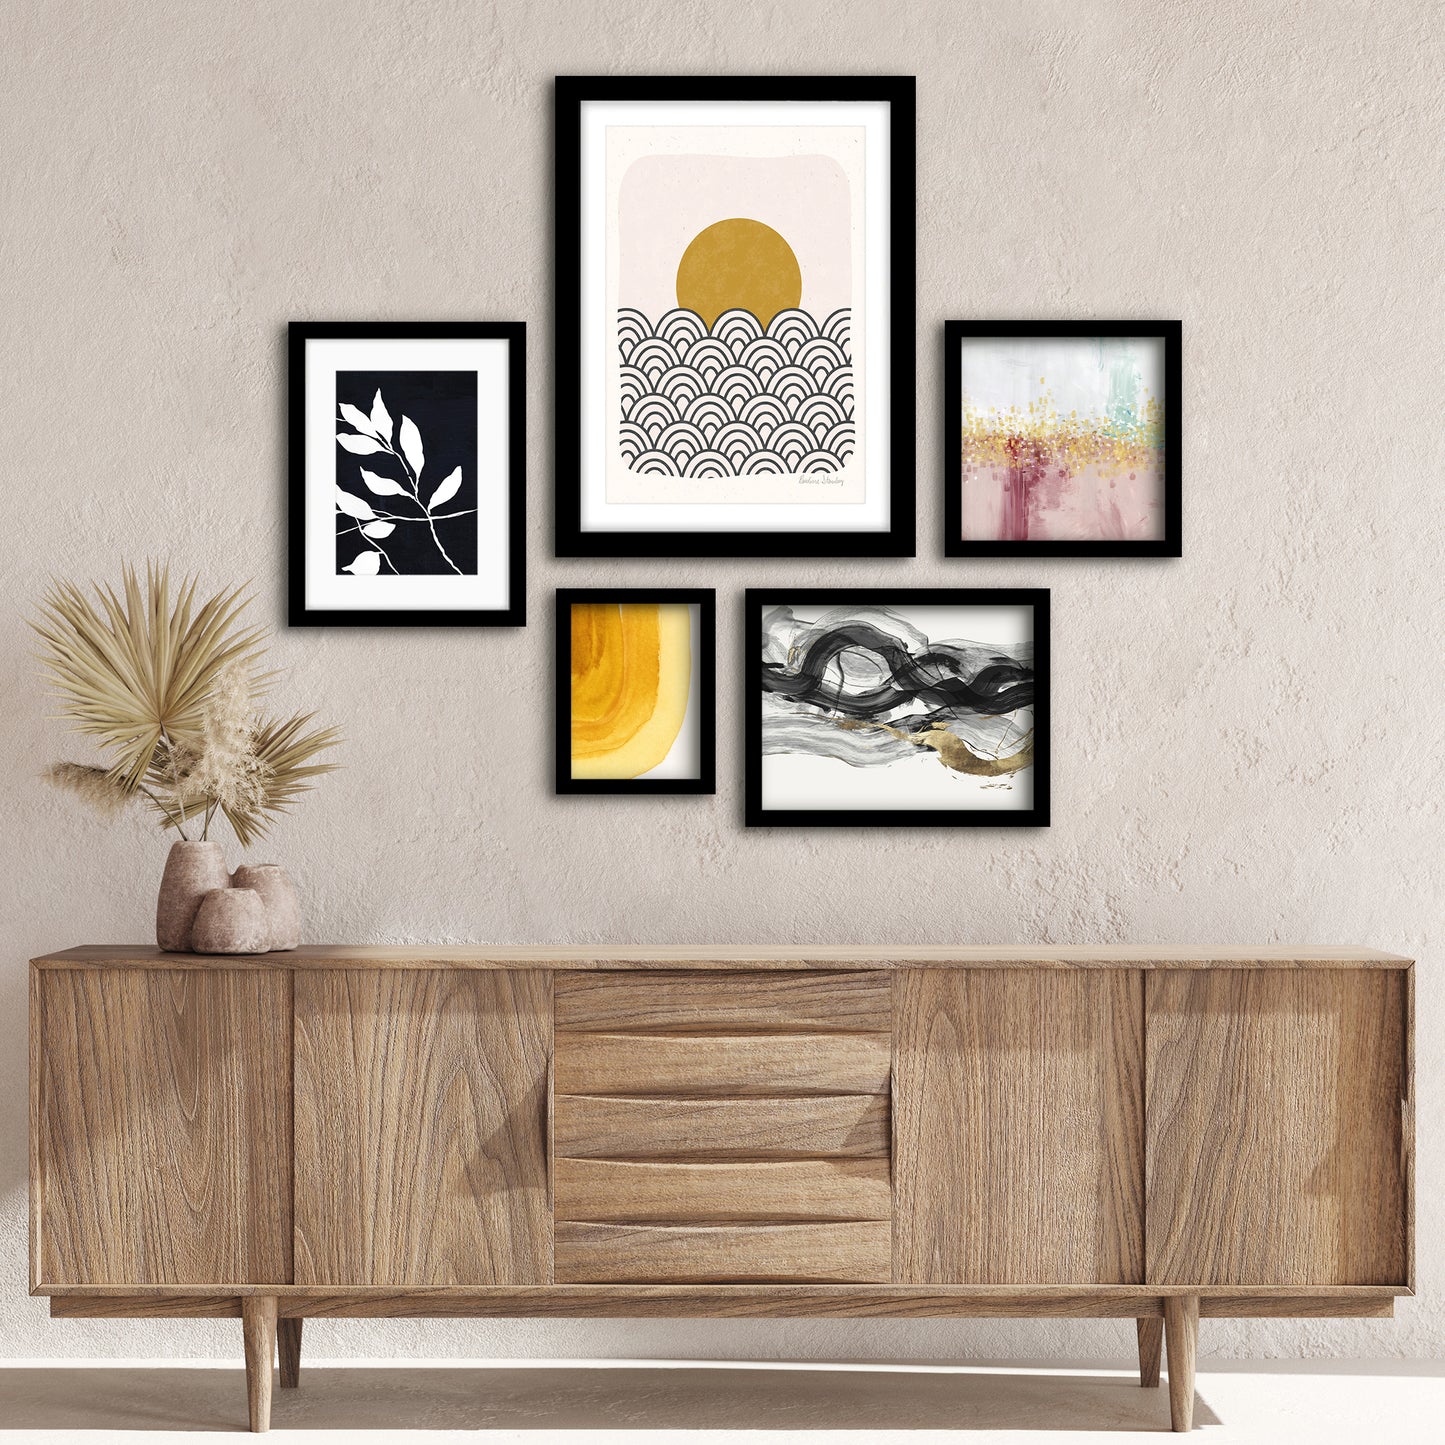 Americanflat 5 Piece Black Framed Gallery Wall Art Set - Black & Gold Abstract Botanical Wire Art Woman